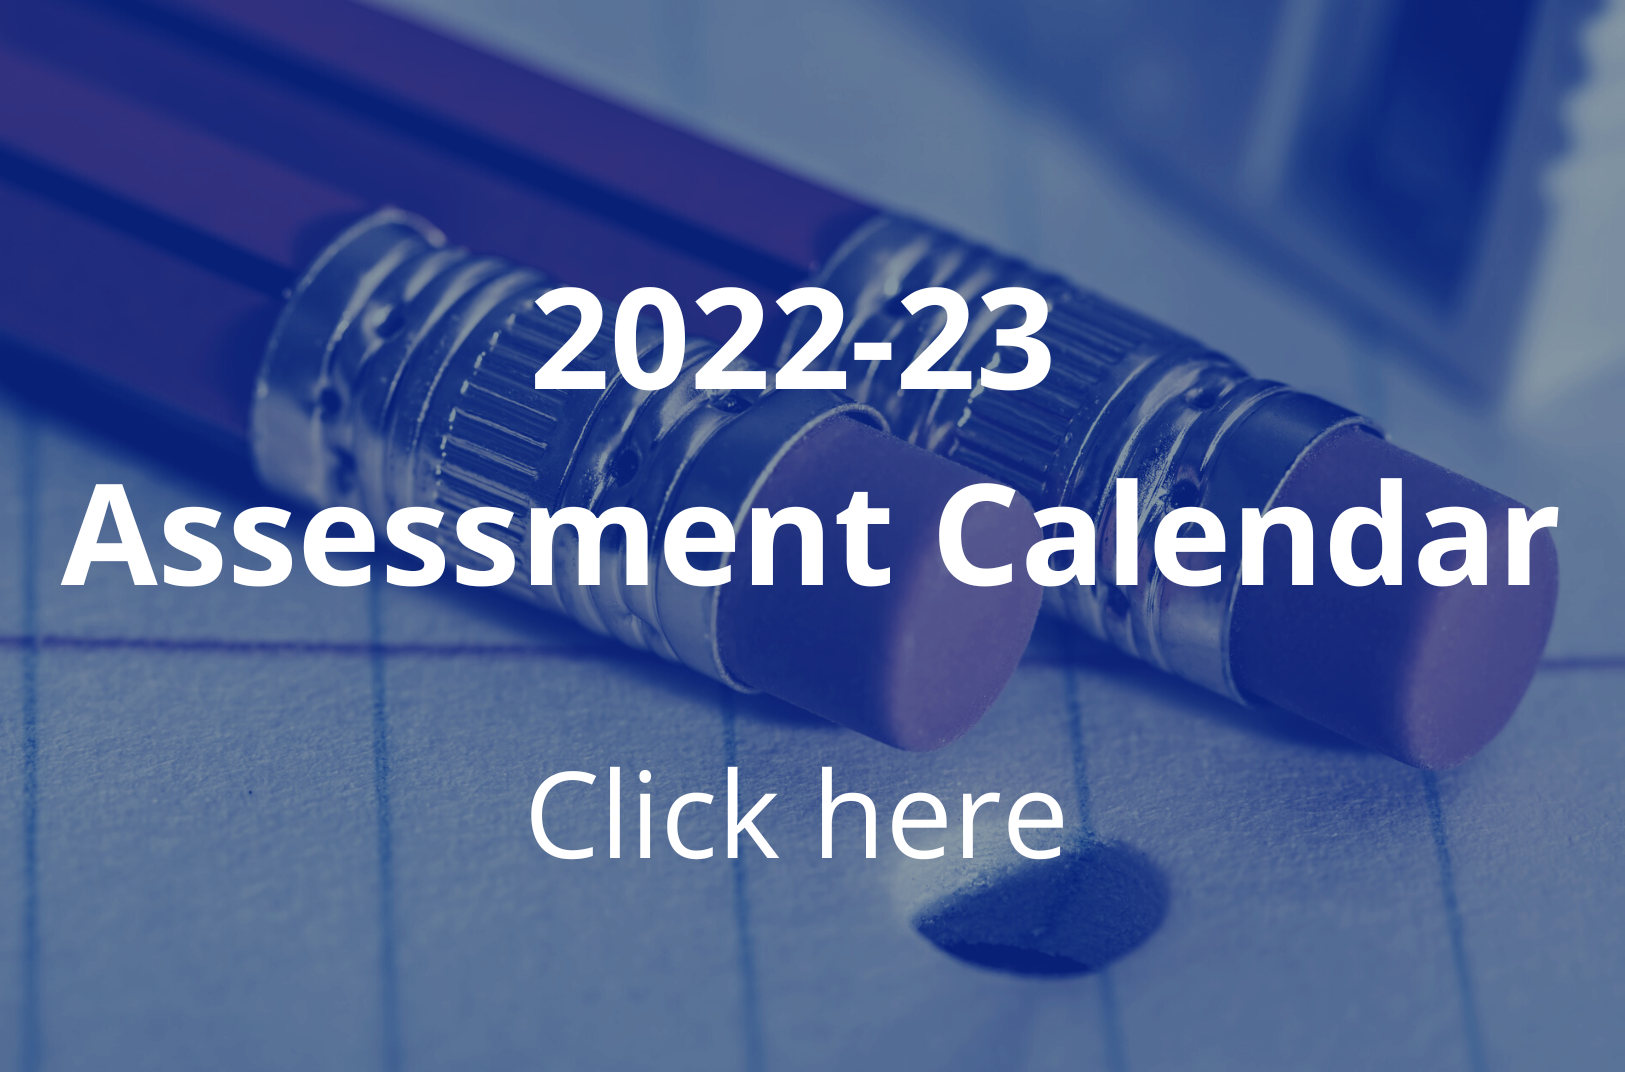 Click here to access the 2022-23 Assessment Calendar